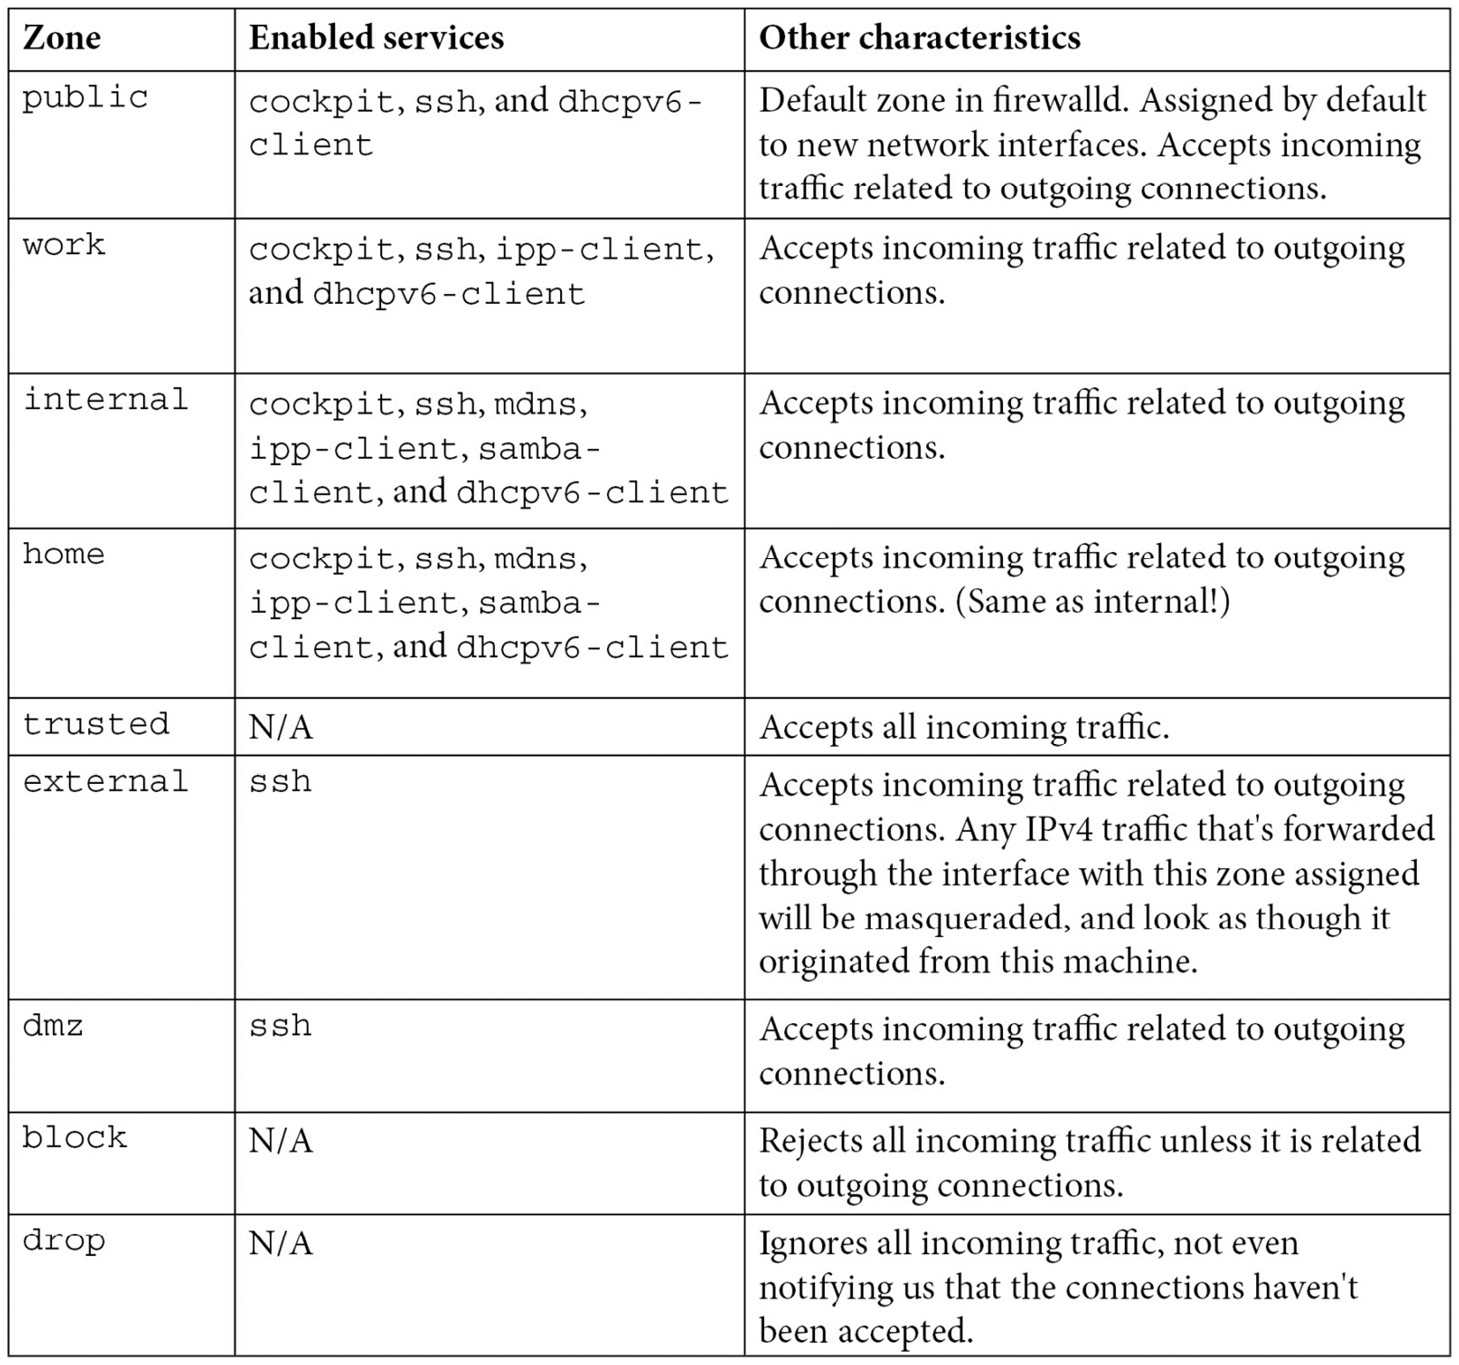 Table 9.1 – Services and characteristics of each zone
